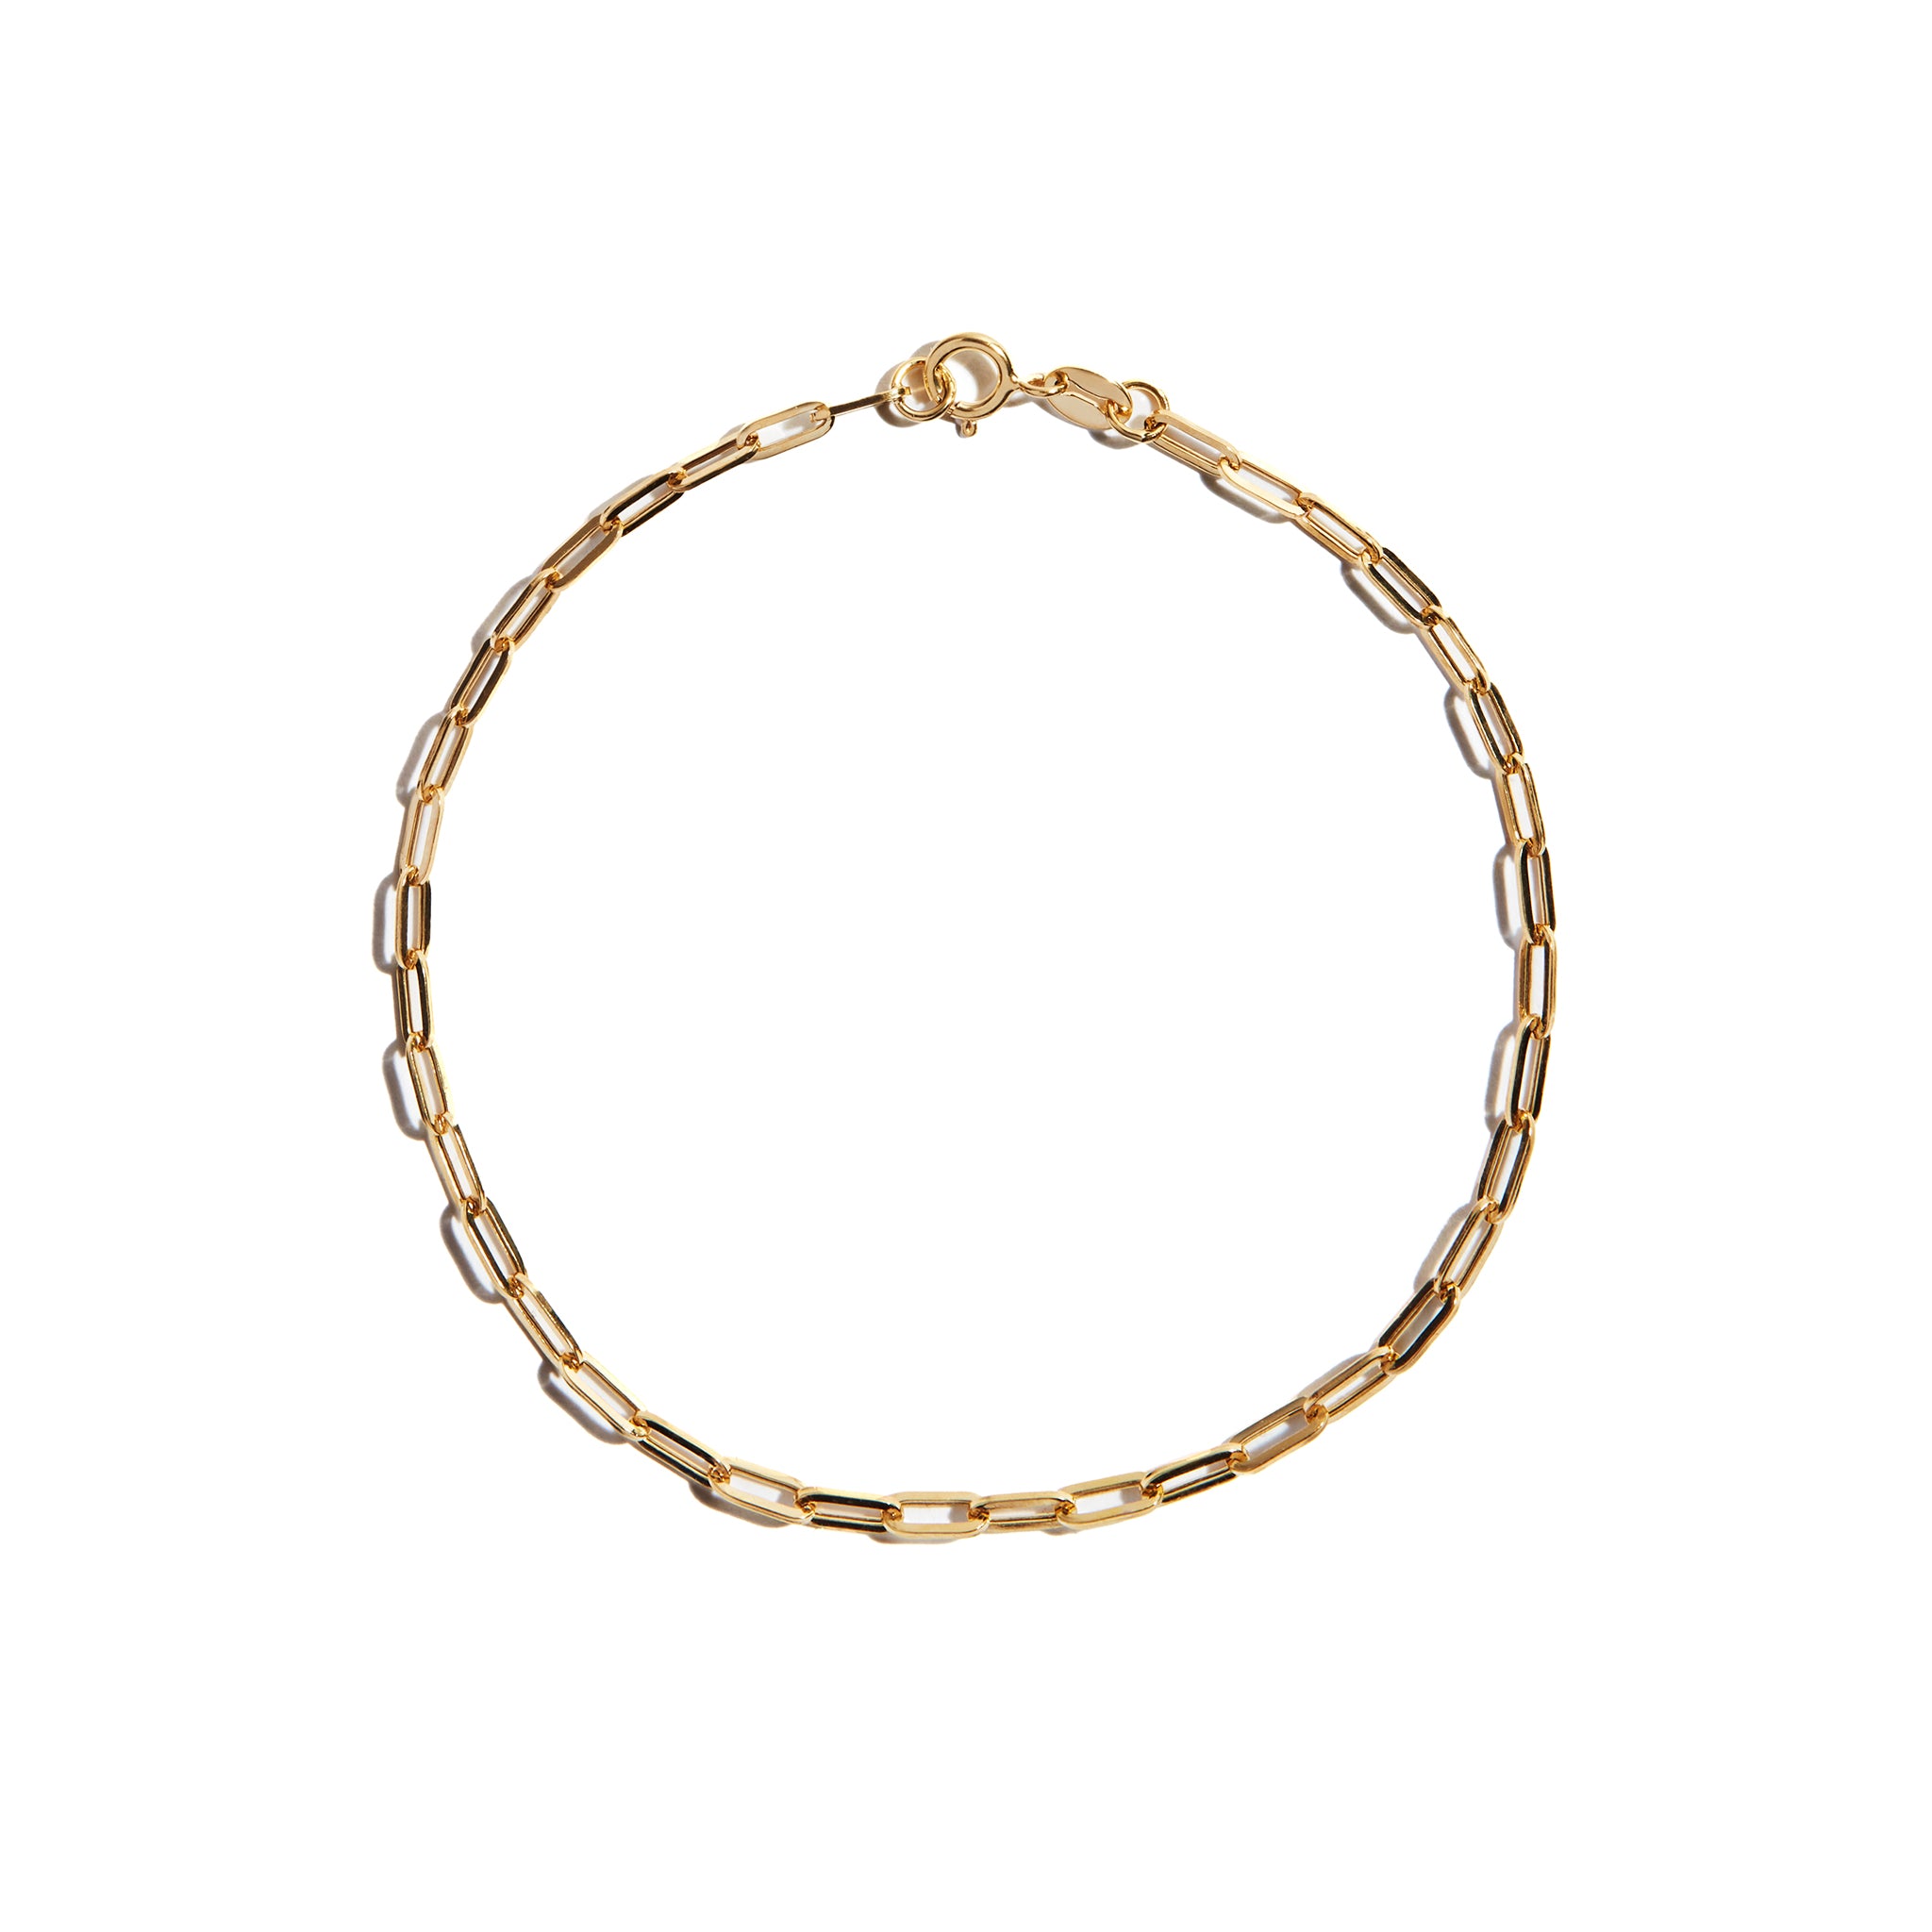 A delicate 7-inch gold chain bracelet, perfect for adding elegance to any wrist, made from 9 carat gold.